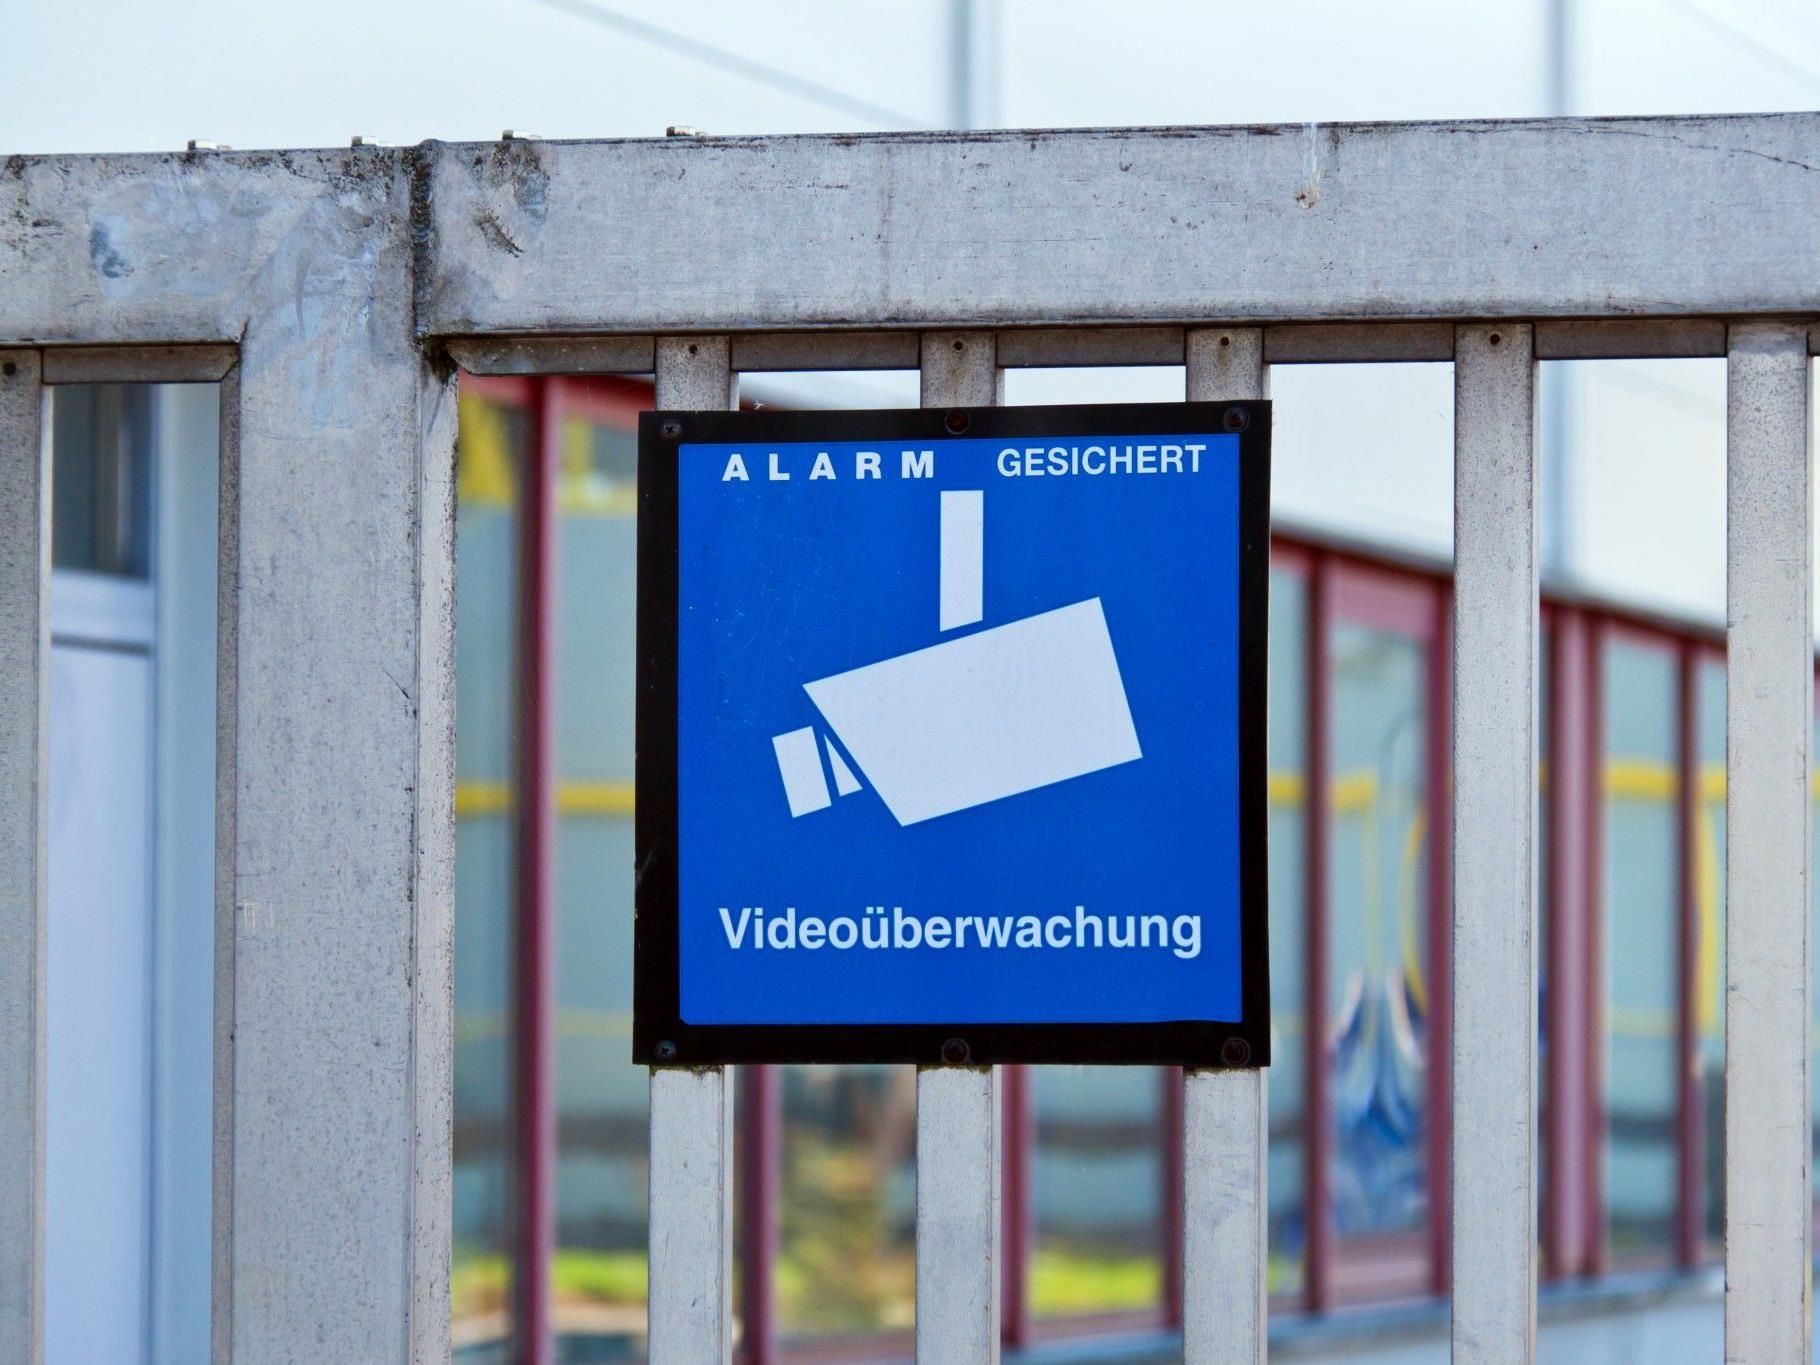 "Big Brother is watching you" auch in Vorarlberg.